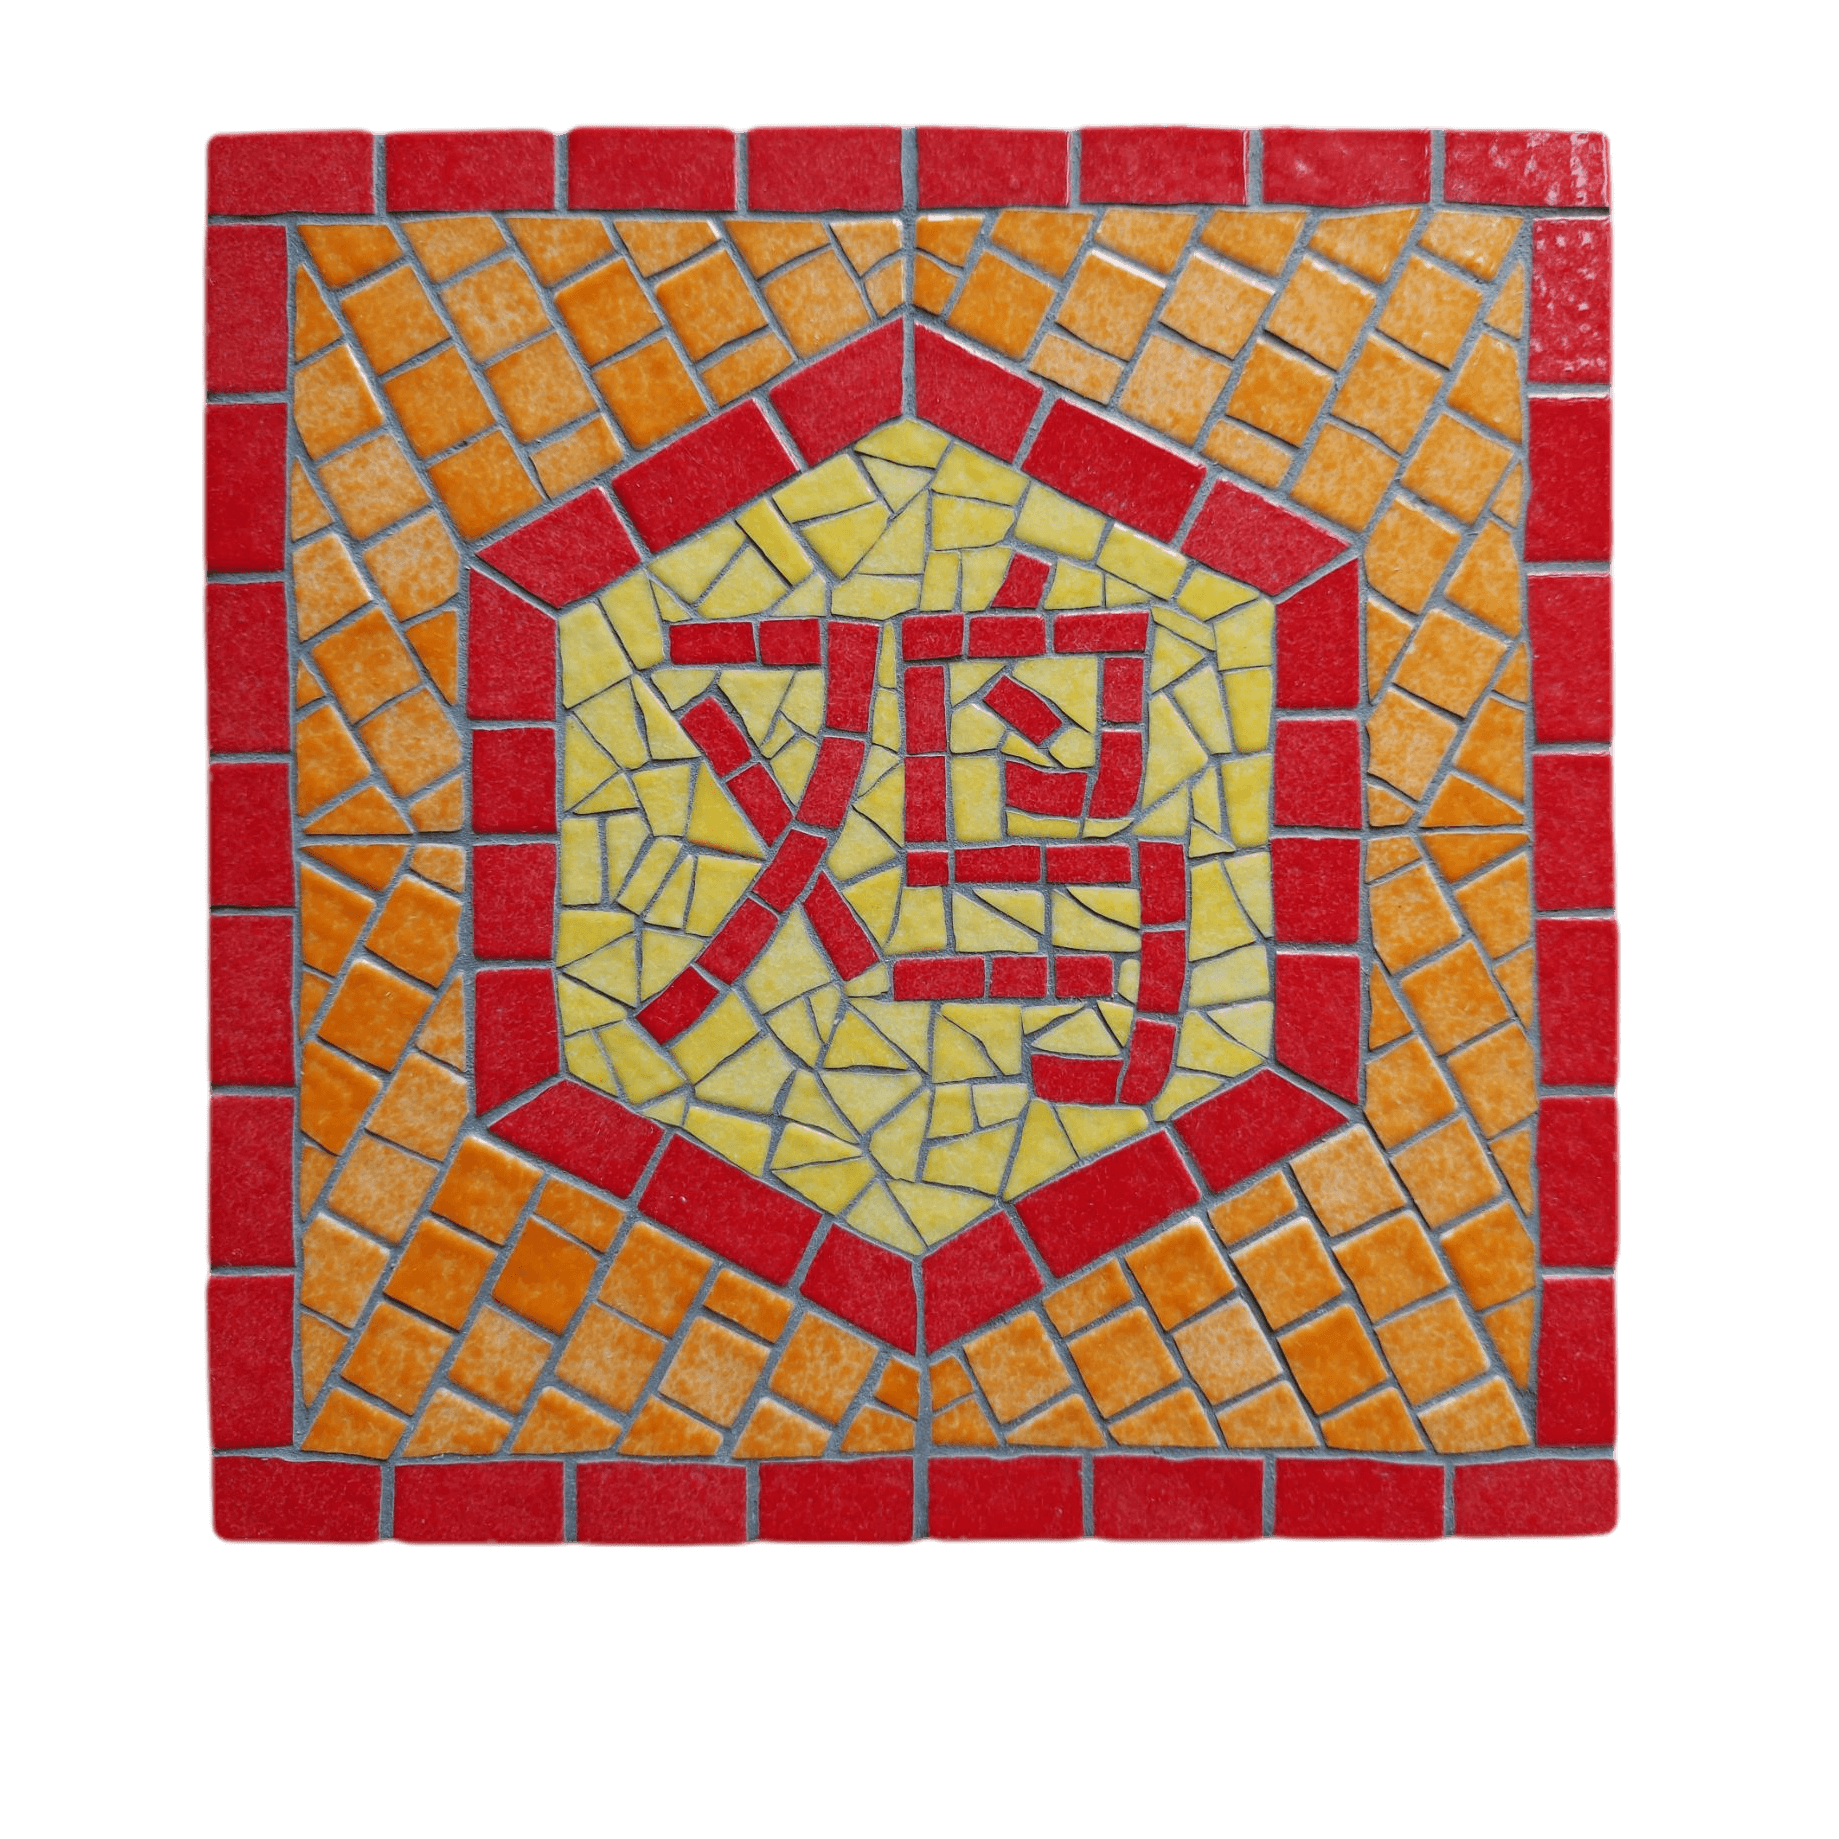 Artisanal Chinese zodiac mosaic, Rooster sign, red line